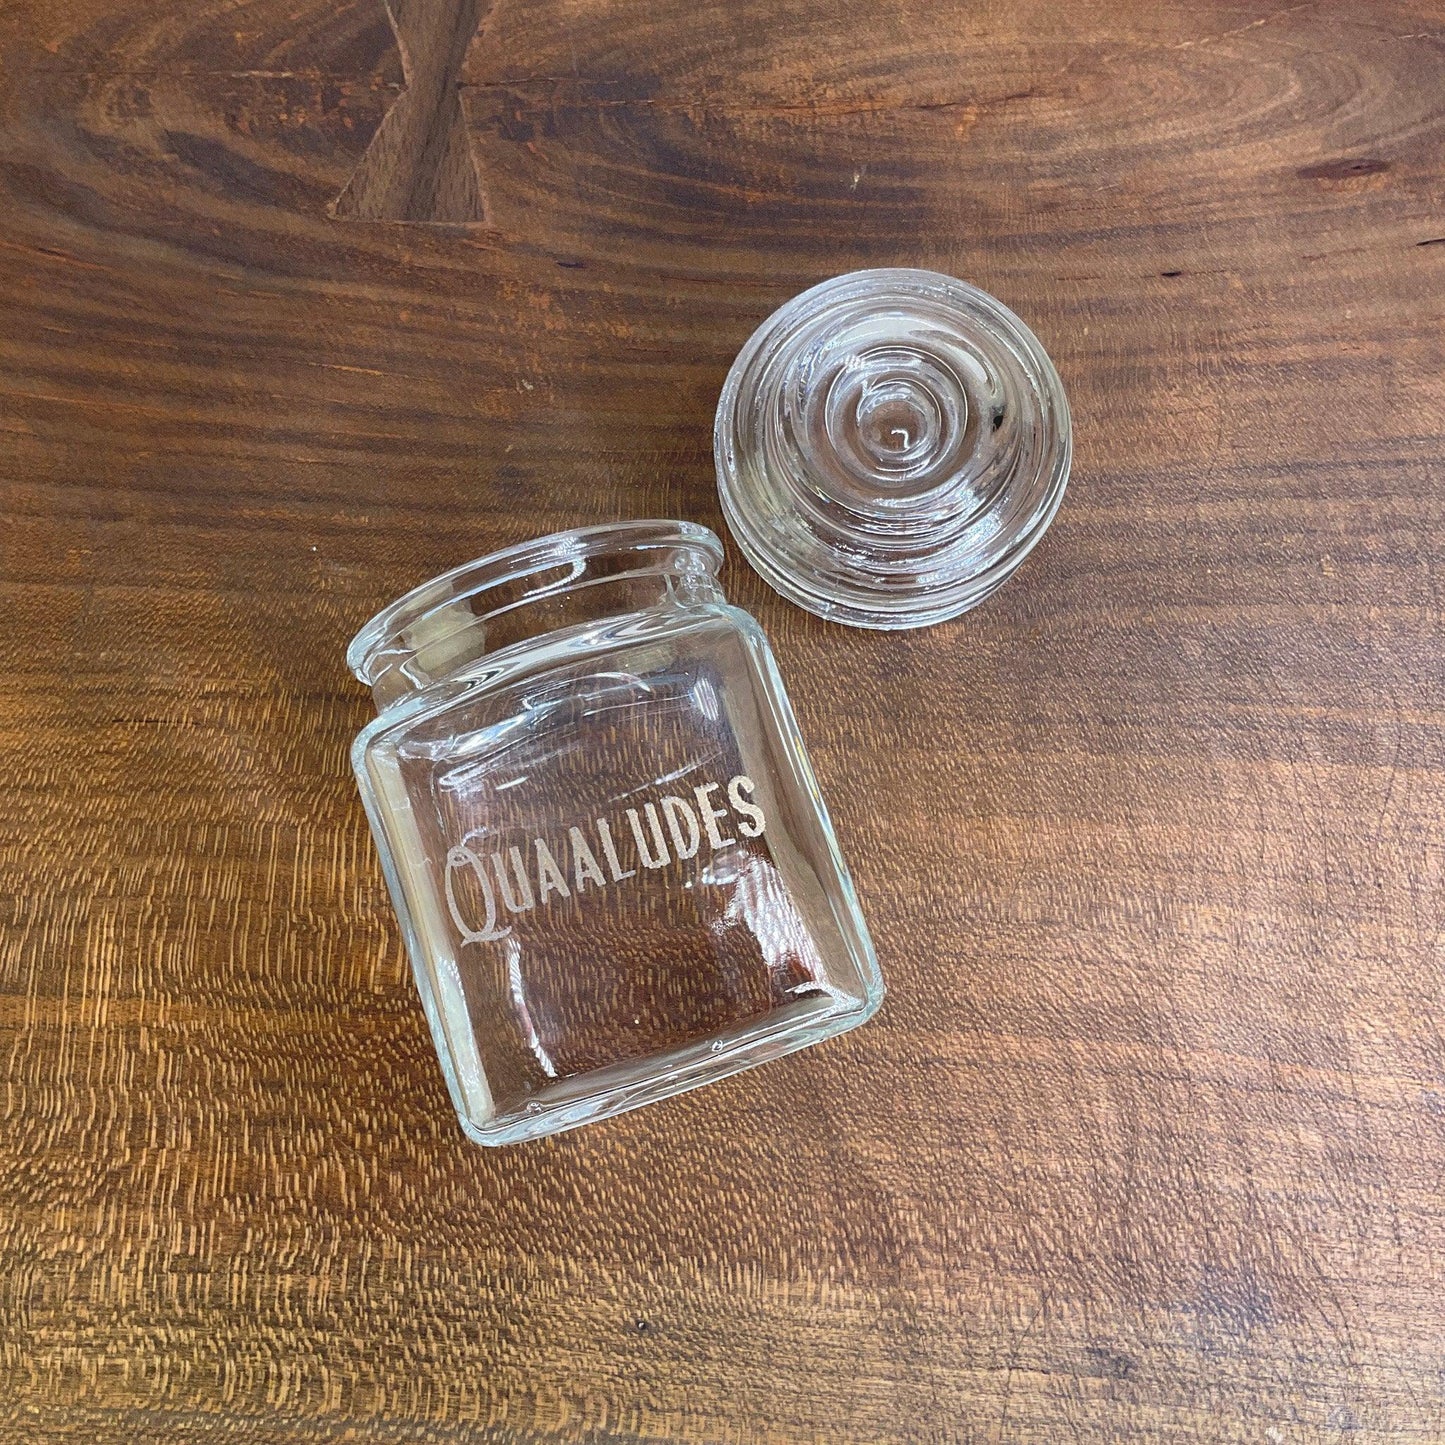 Quaaludes Apothecary Jar - Offensively Domestic